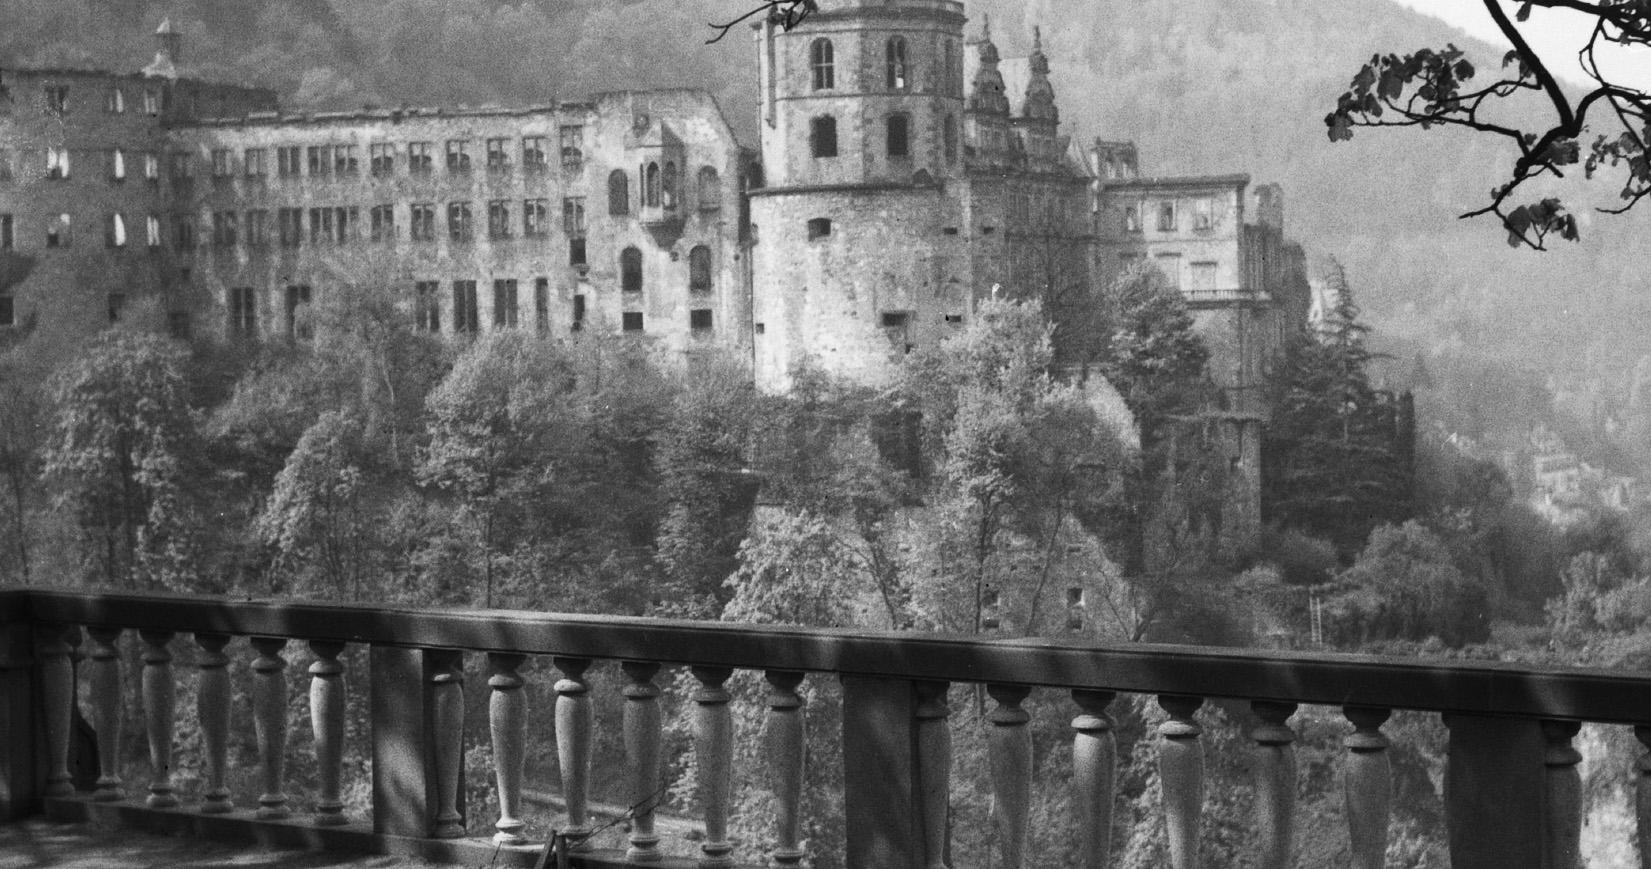 View to the Heidelberg castle, Germany 1938, Printed Later - Photograph by Karl Heinrich Lämmel